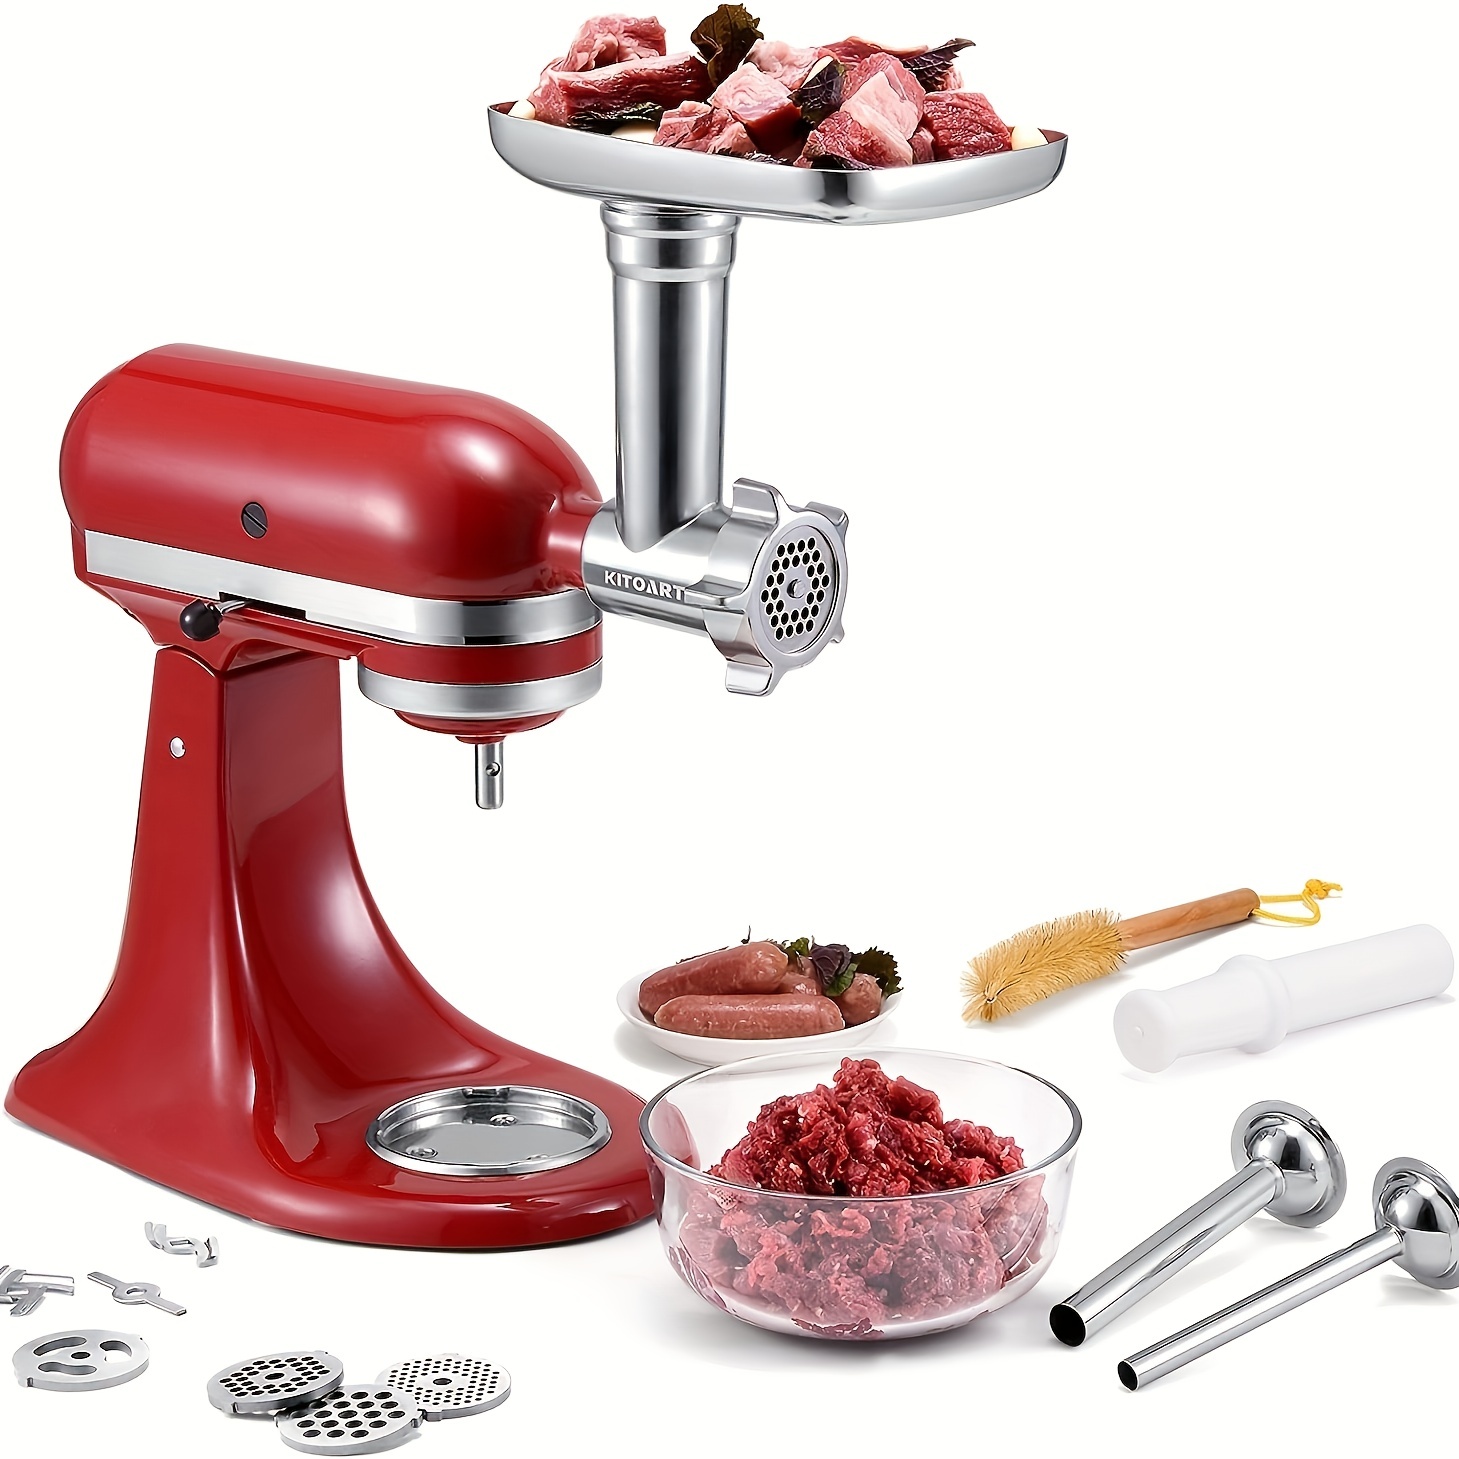 Stainless Steel Food Grinder Attachment fit KitchenAid Stand Mixers  Including Sausage Stuffer, Perfect Attachment for KitchenAid Mixers